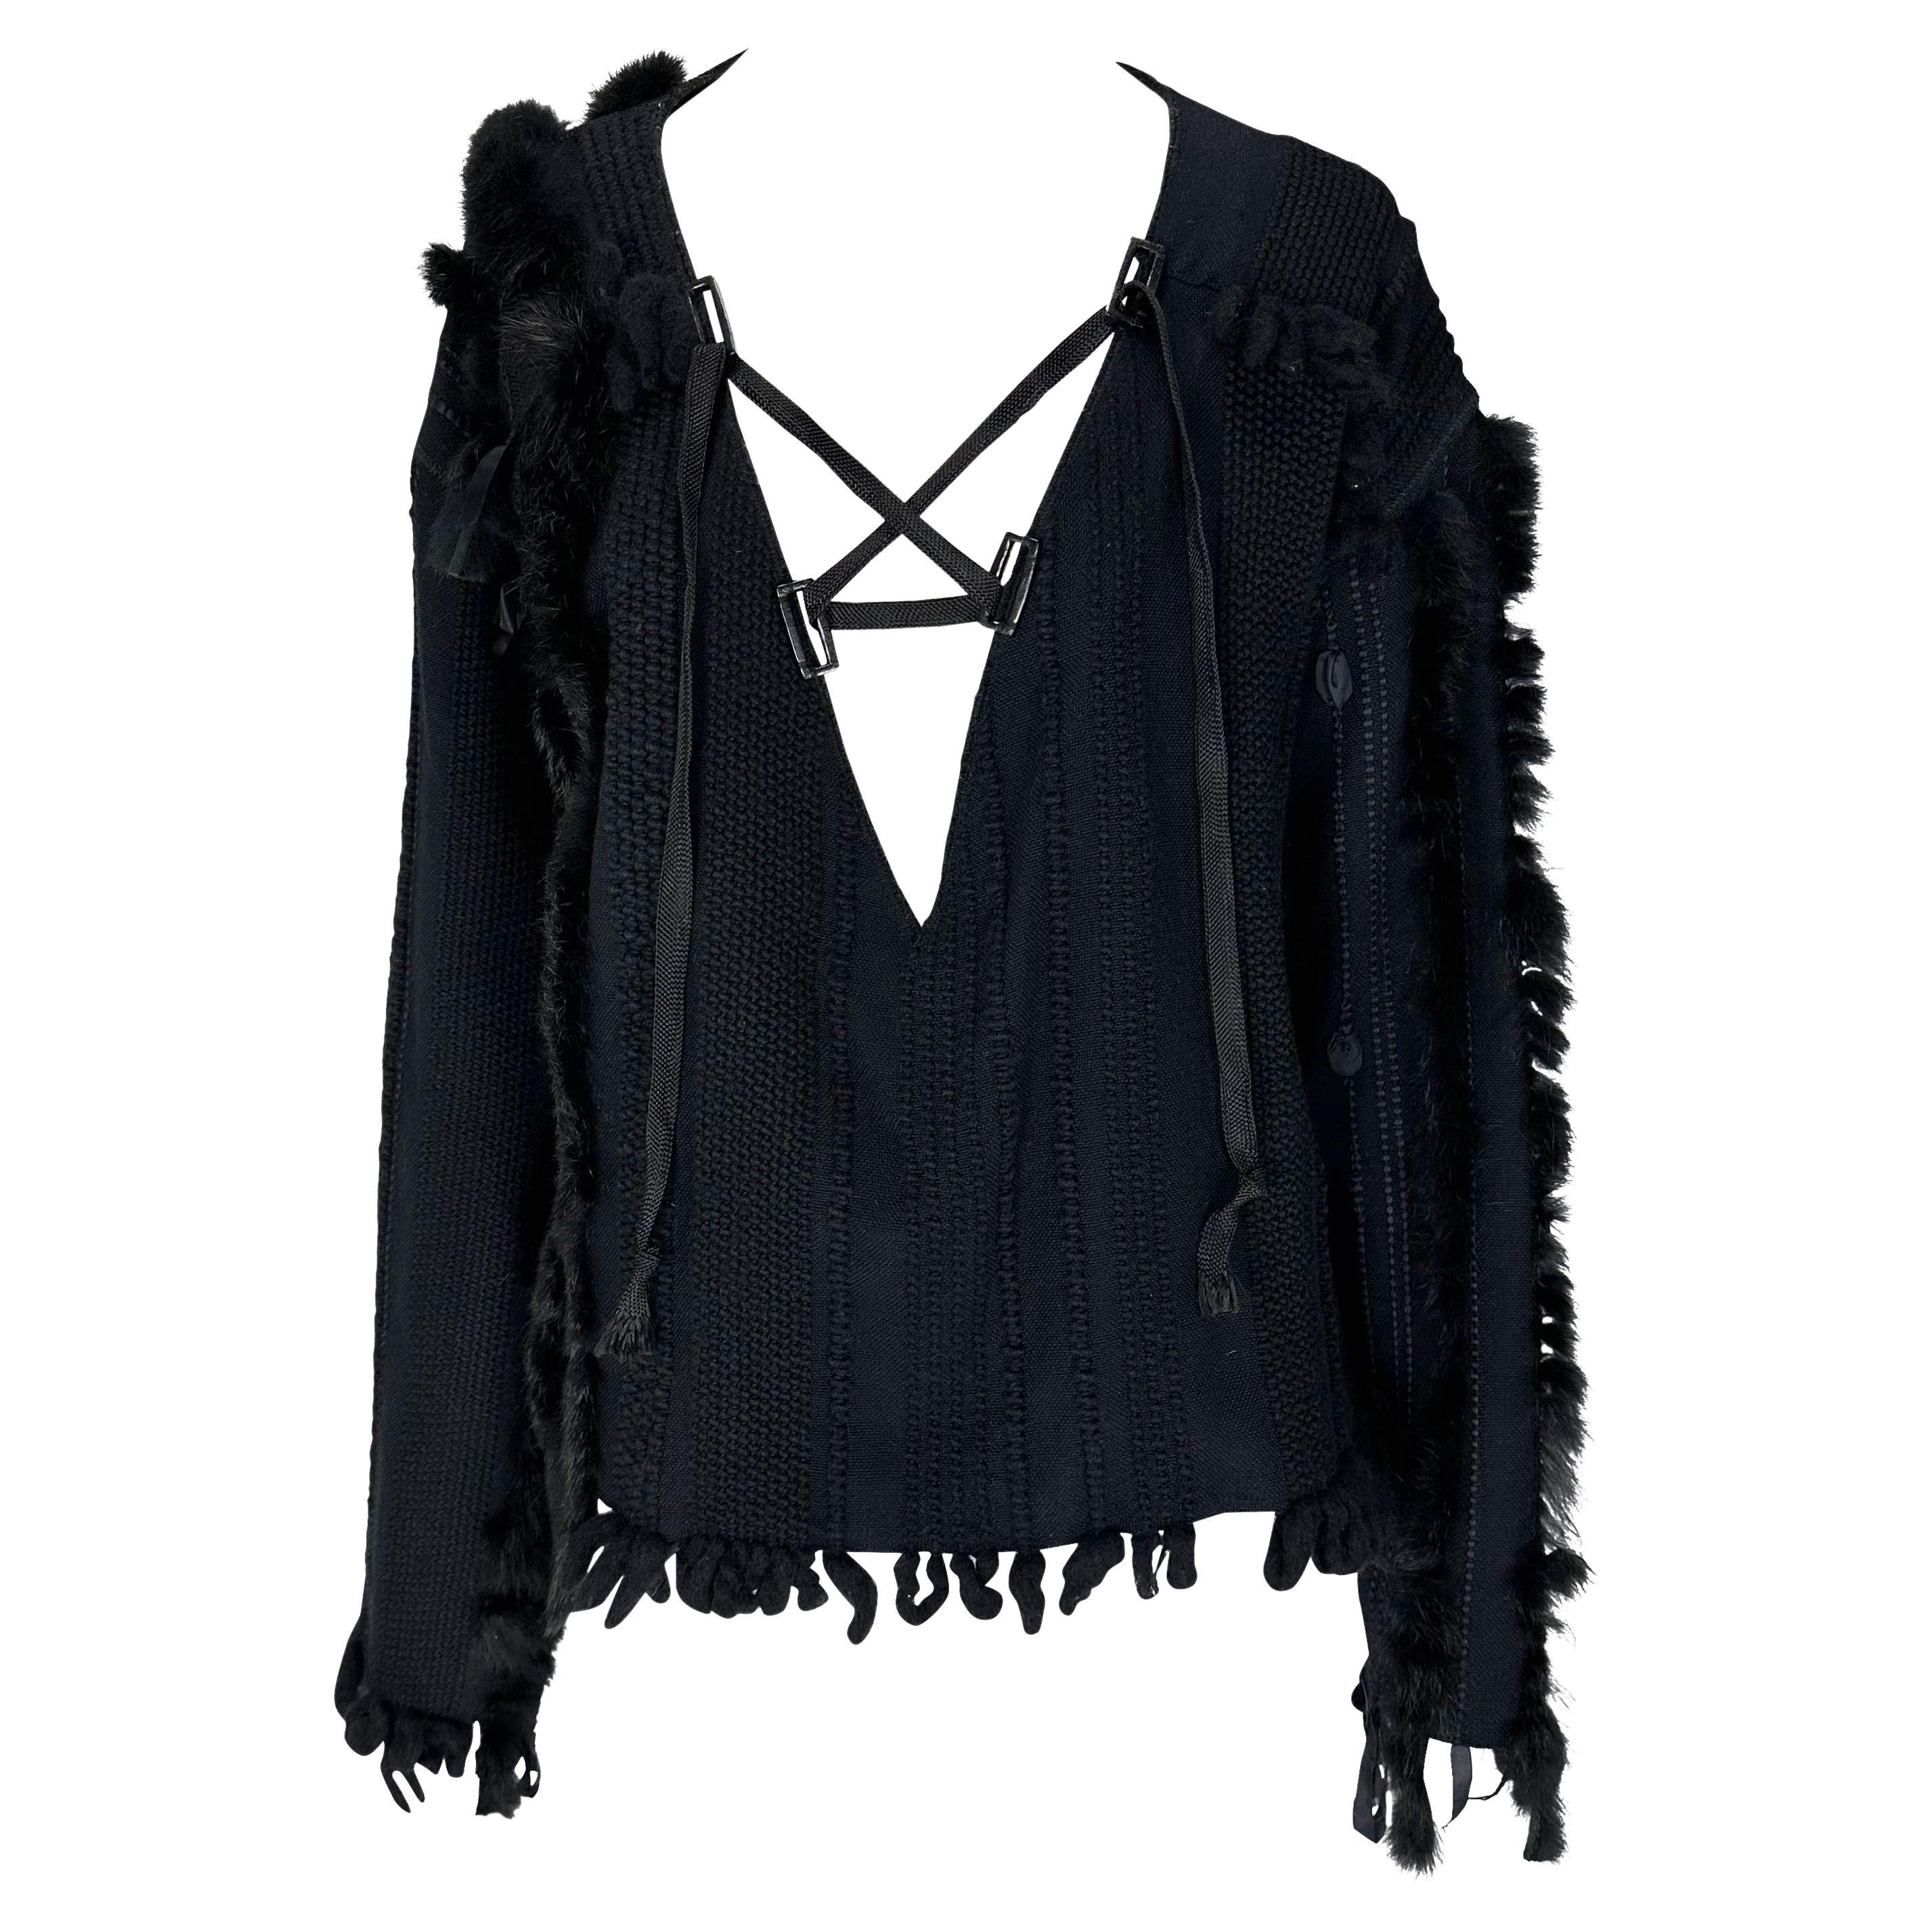 F/W 2002 Gucci by Tom Ford Black Fur Trimmed Knit Lace-Up Oversized Sweater Top en vente